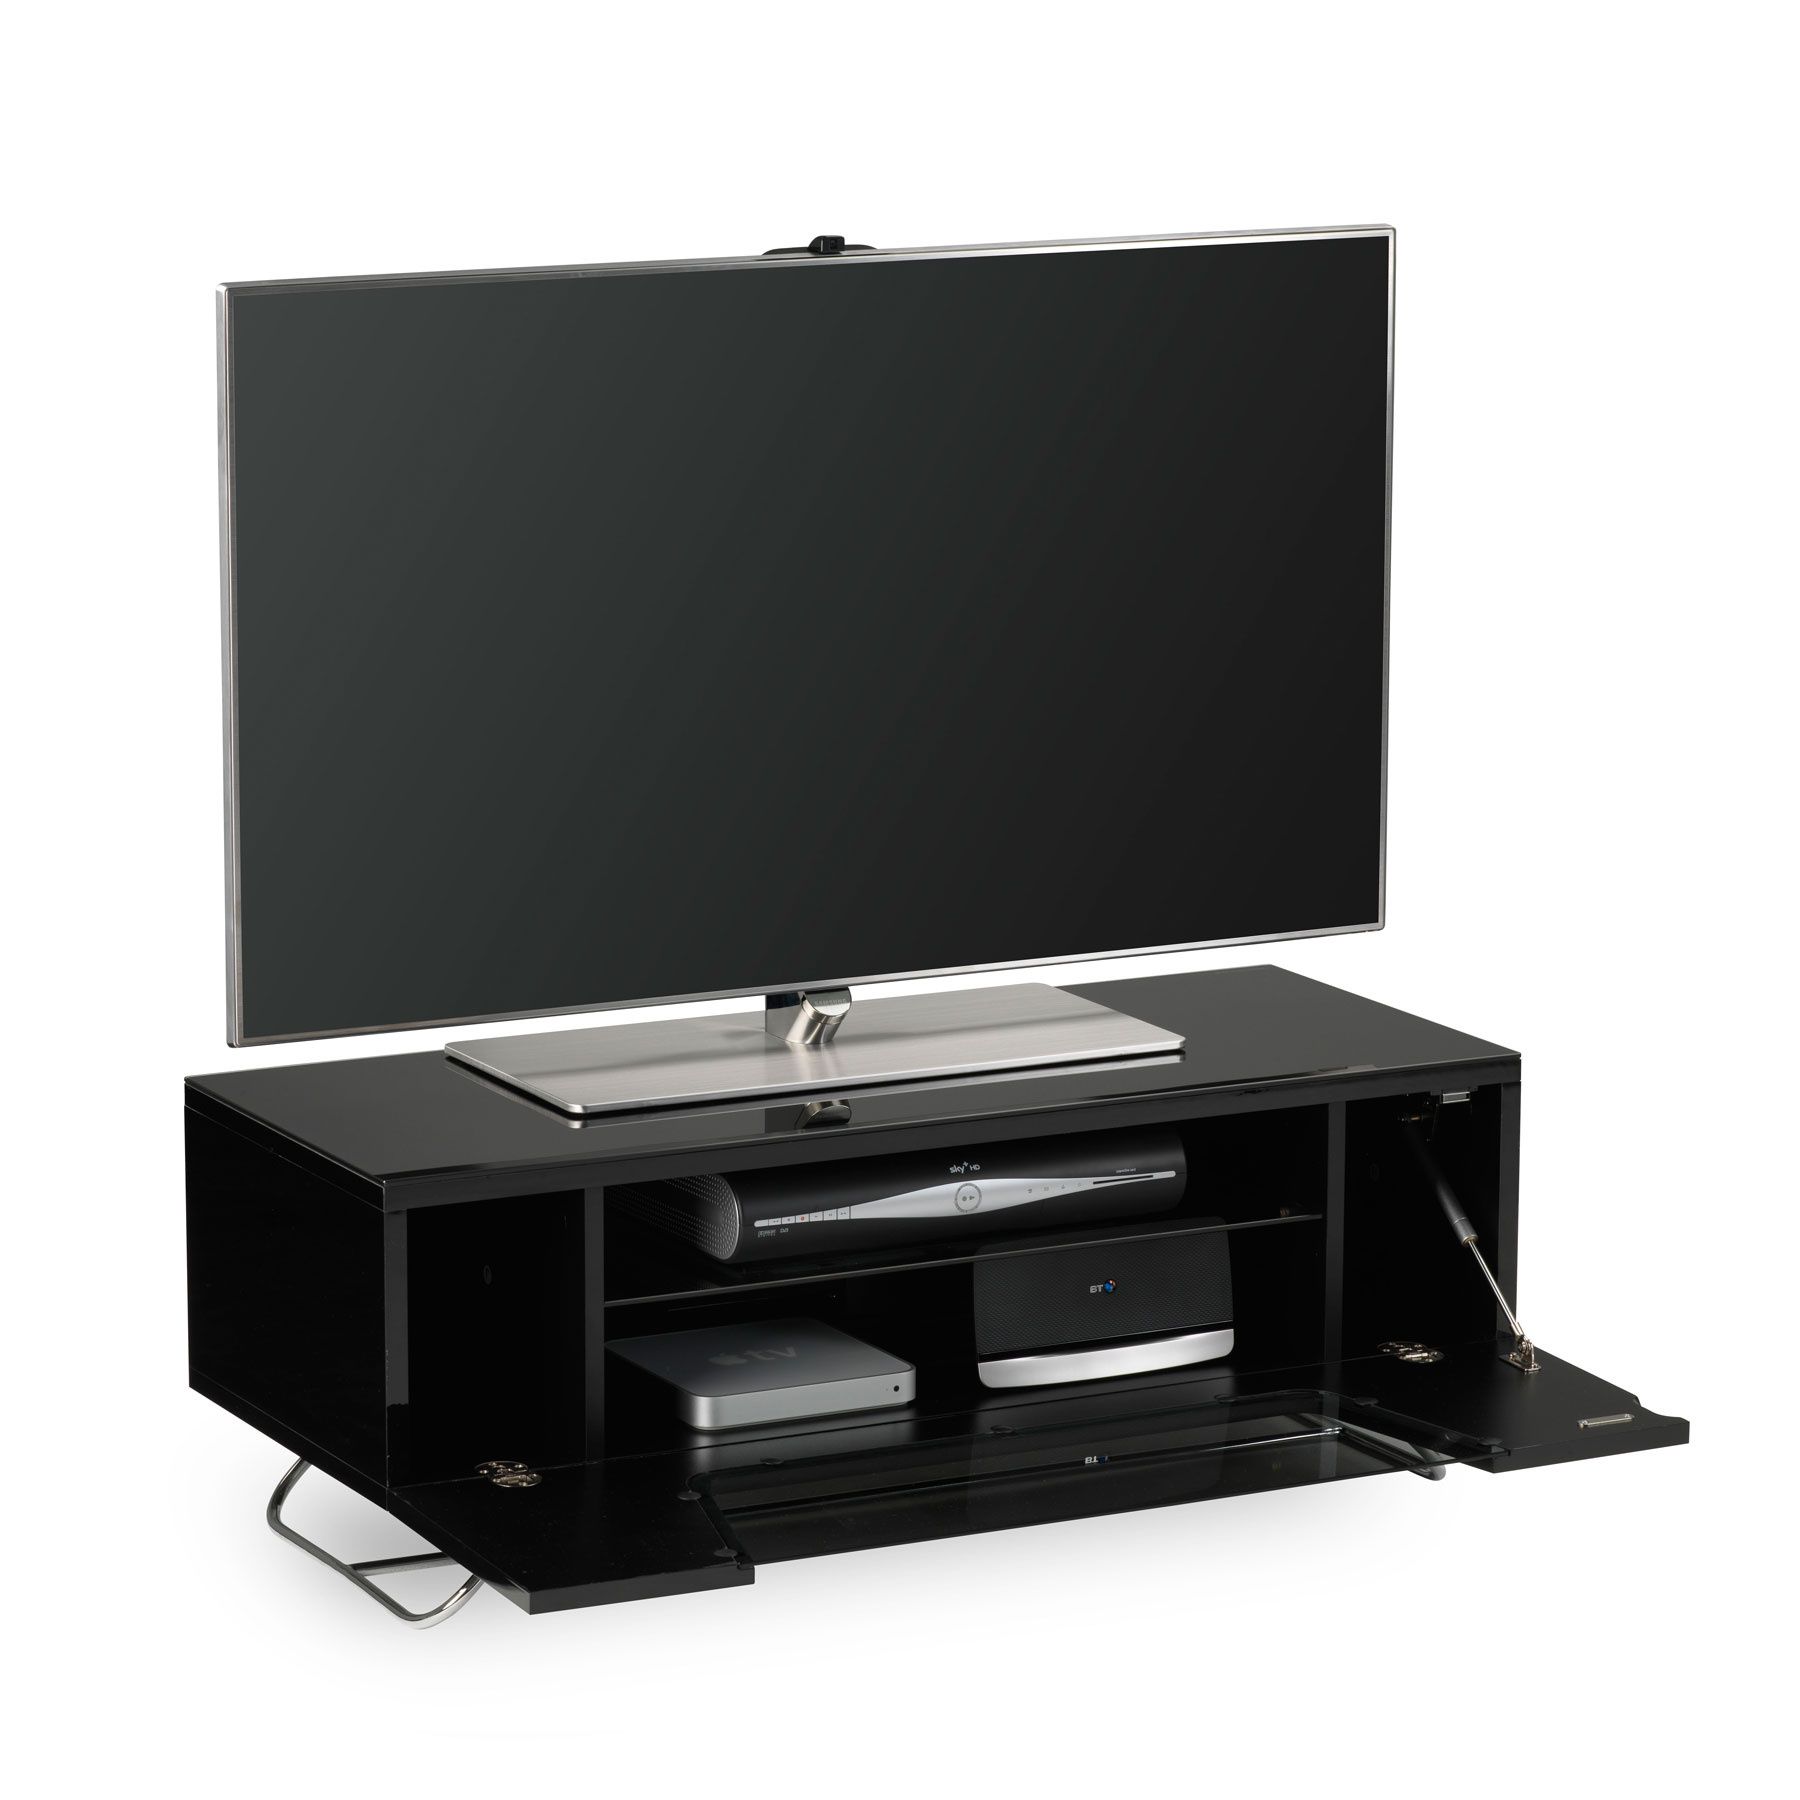 Alphason Chromium 2 100cm Black Tv Stand For Up To 50" Tvs Intended For Tv Stands For Tvs Up To 50&quot; (View 9 of 15)